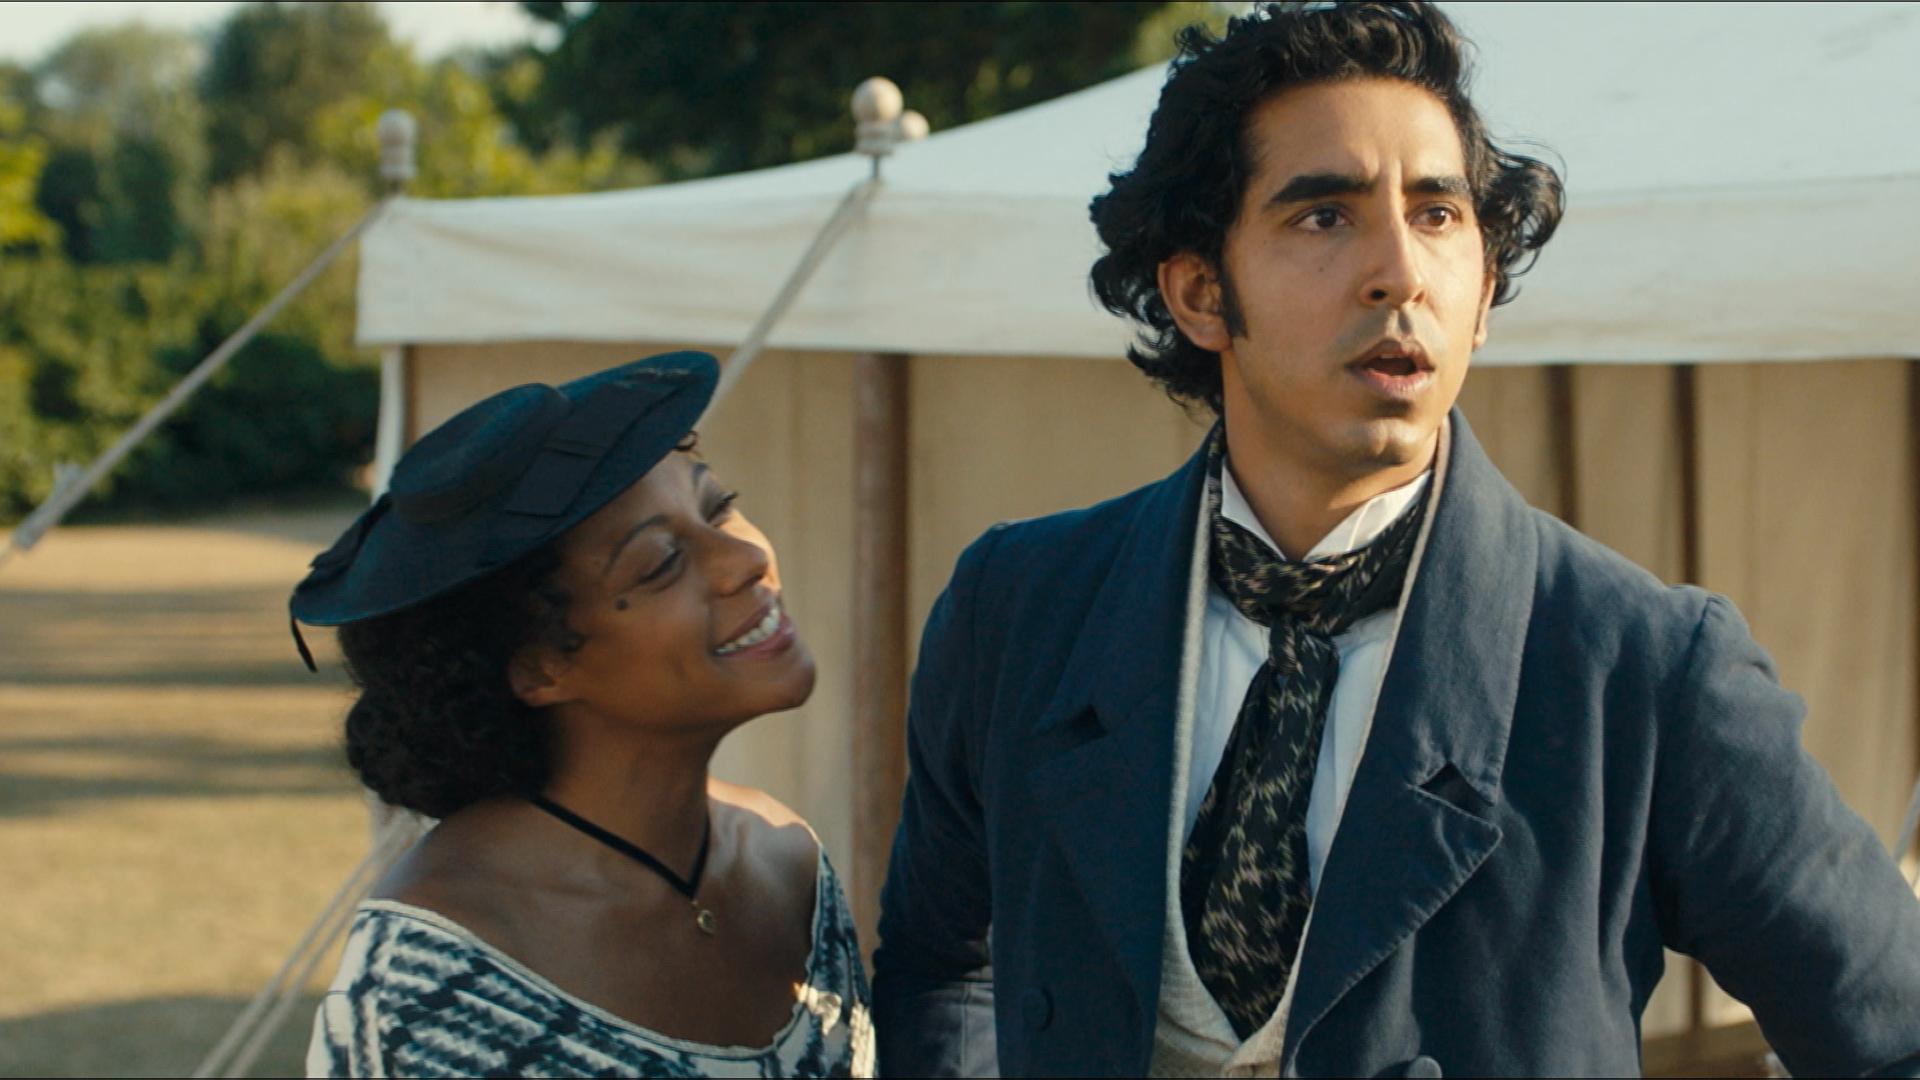 How Dev Patel Was Tapped to Tell 'The Personal History of David Copperfield' (Exclusive)